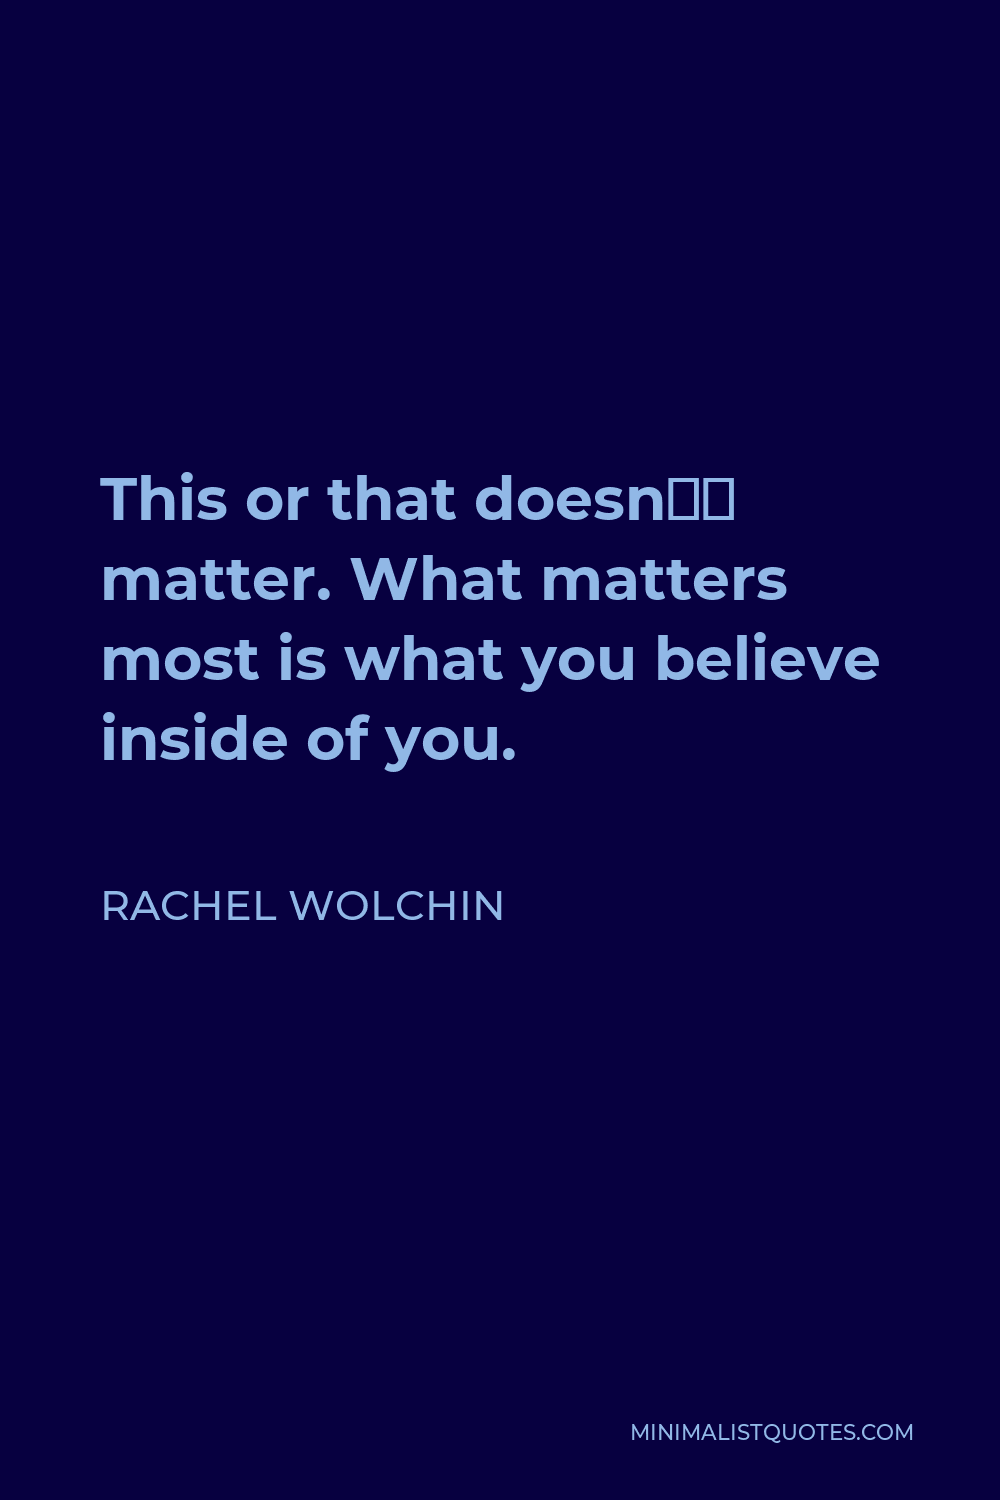 Rachel Wolchin Quote - This or that doesn’t matter. What matters most is what you believe inside of you.